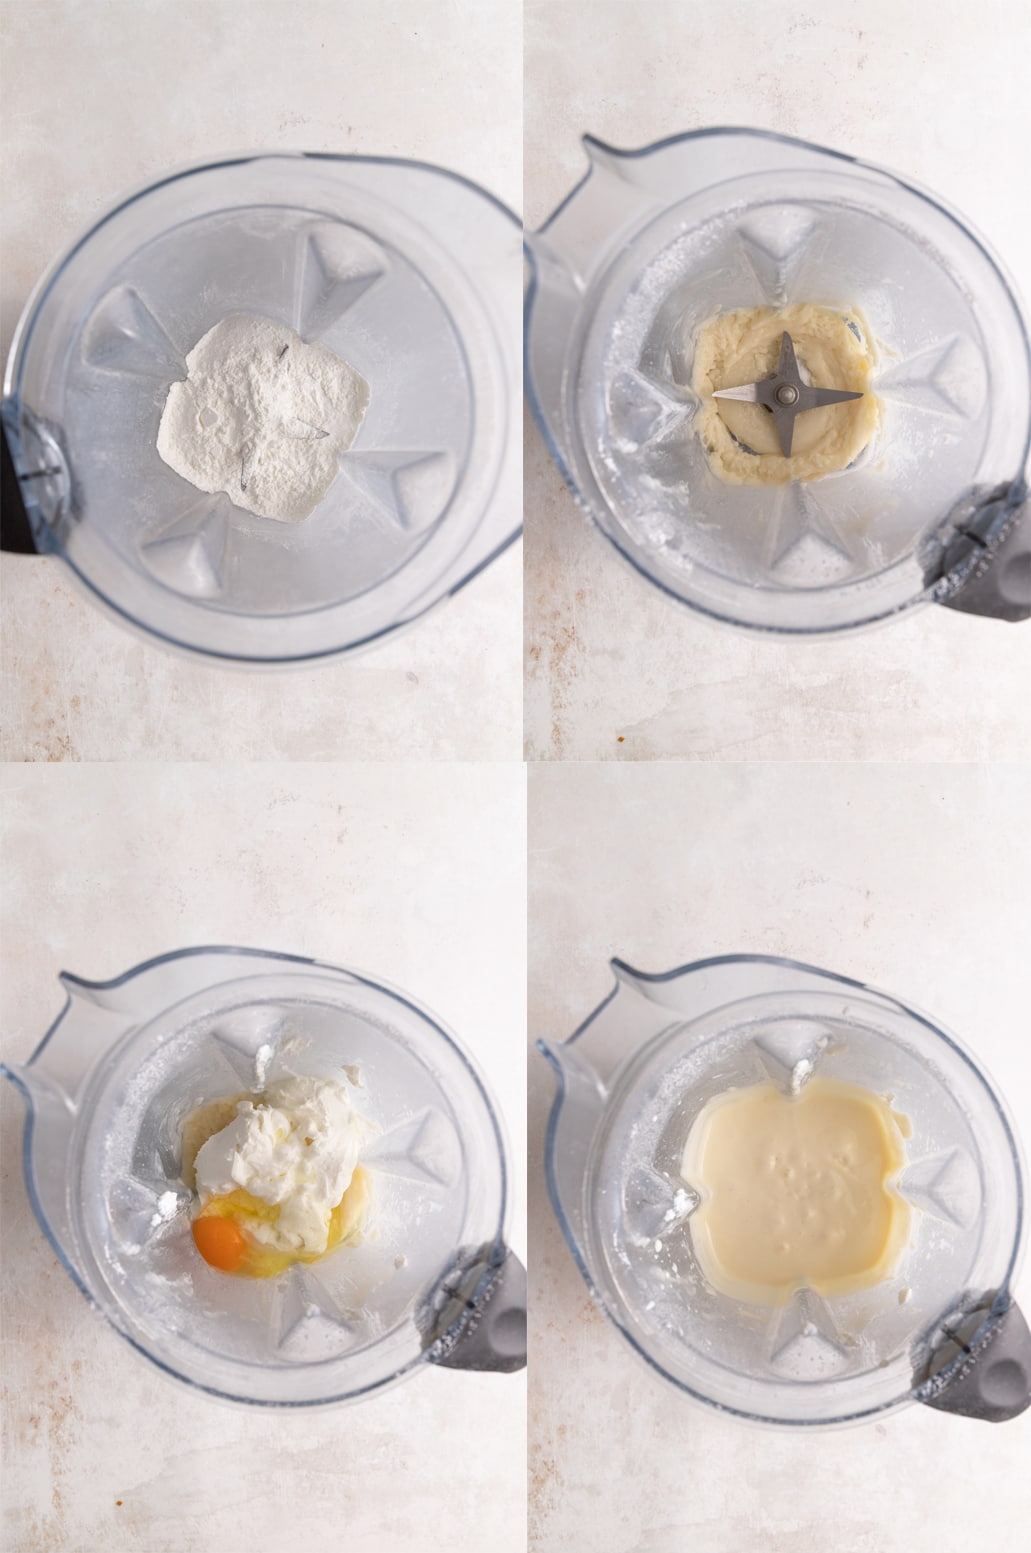 Process steps showing how to make the custard pastry filling. 